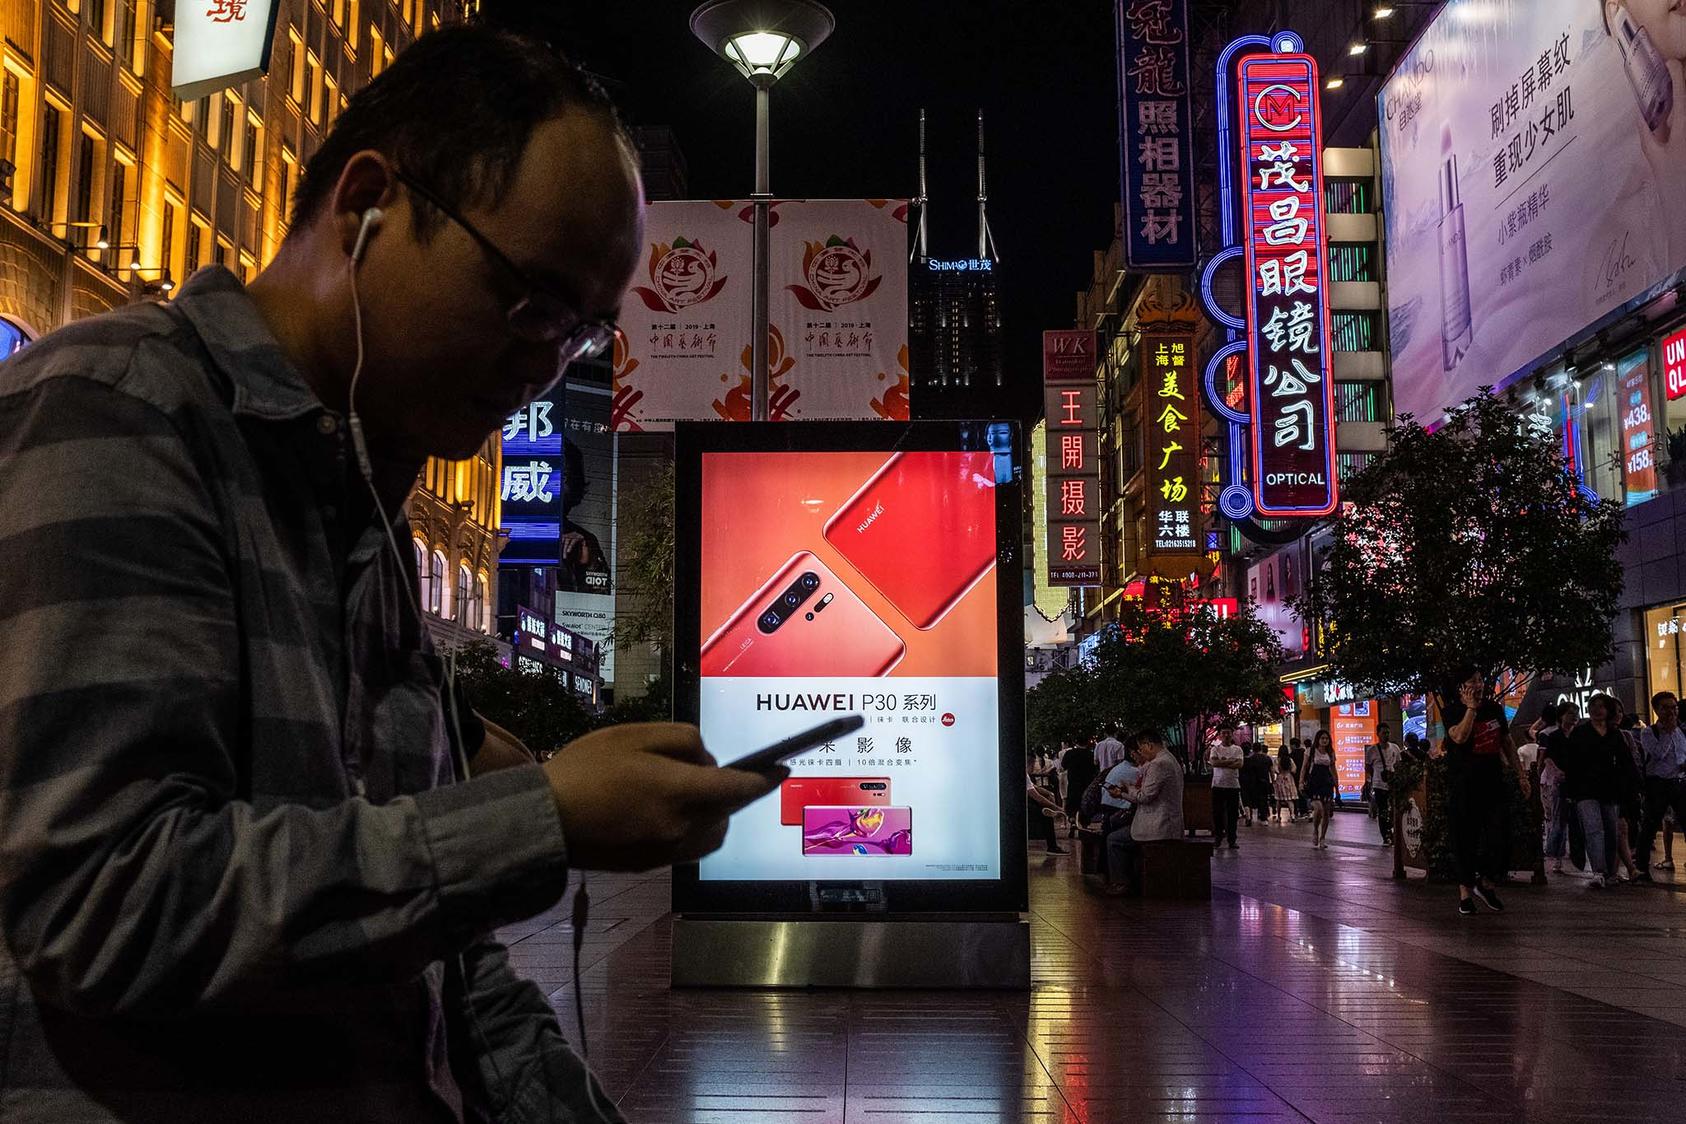 A Huawei billboard in Shanghai, China. The company is reportedly releasing a new operating system that could change Africa’s mobile ecosystem. (Lam Yik Fei/The New York Times)